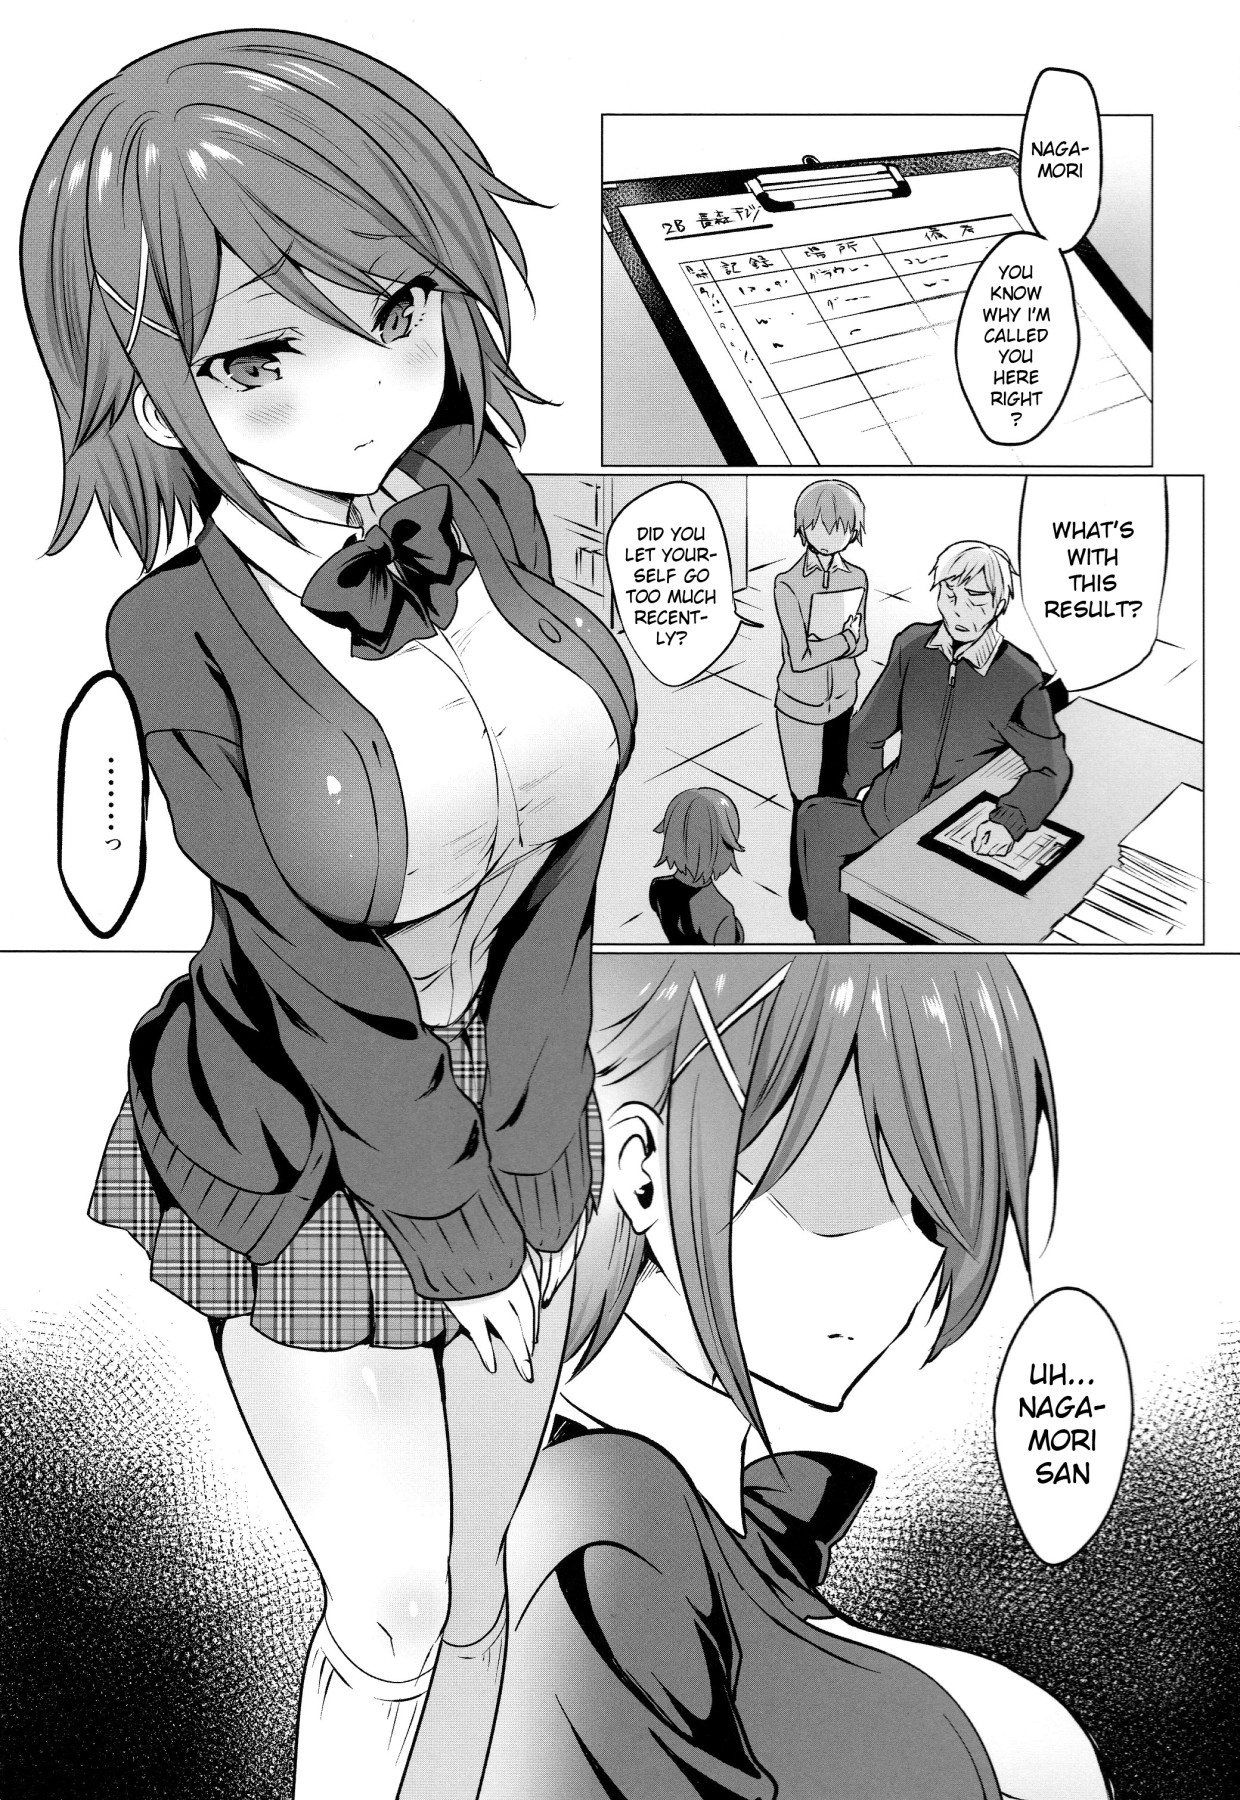 Hentai Manga Comic-School In The Springs of Youth 16-Read-2